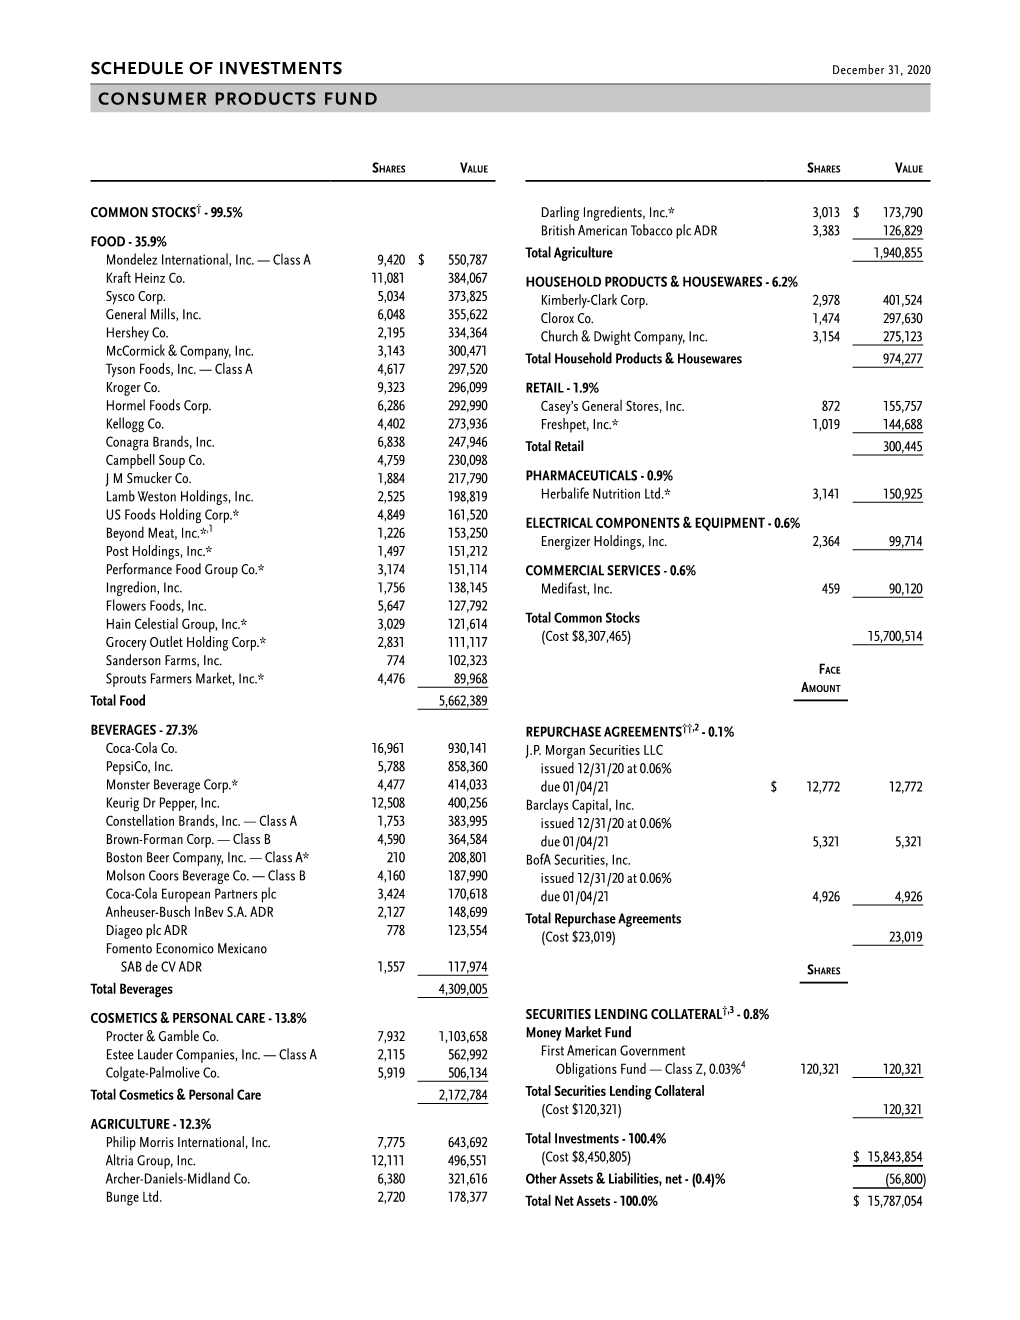 Schedule of Investments Consumer Products Fund